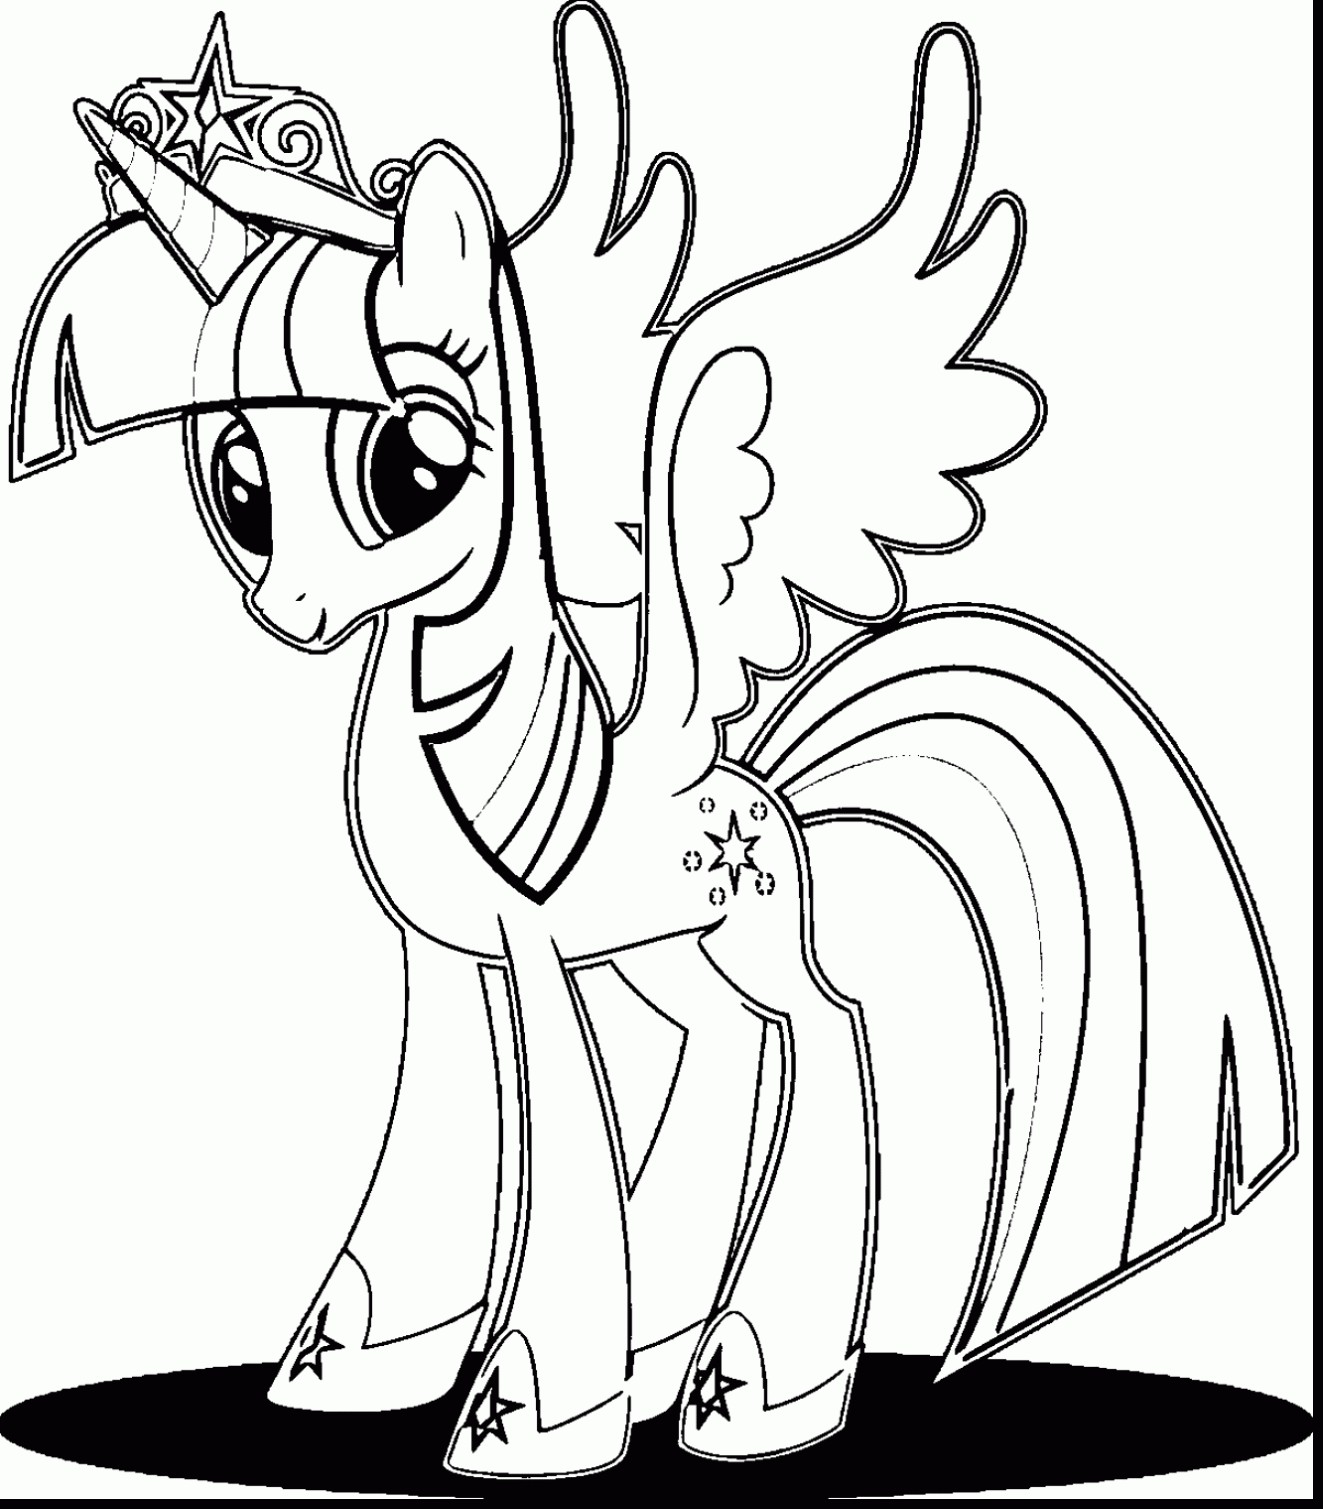 Coloring Pages Of Princess Twilight Sparkle Wallpaper